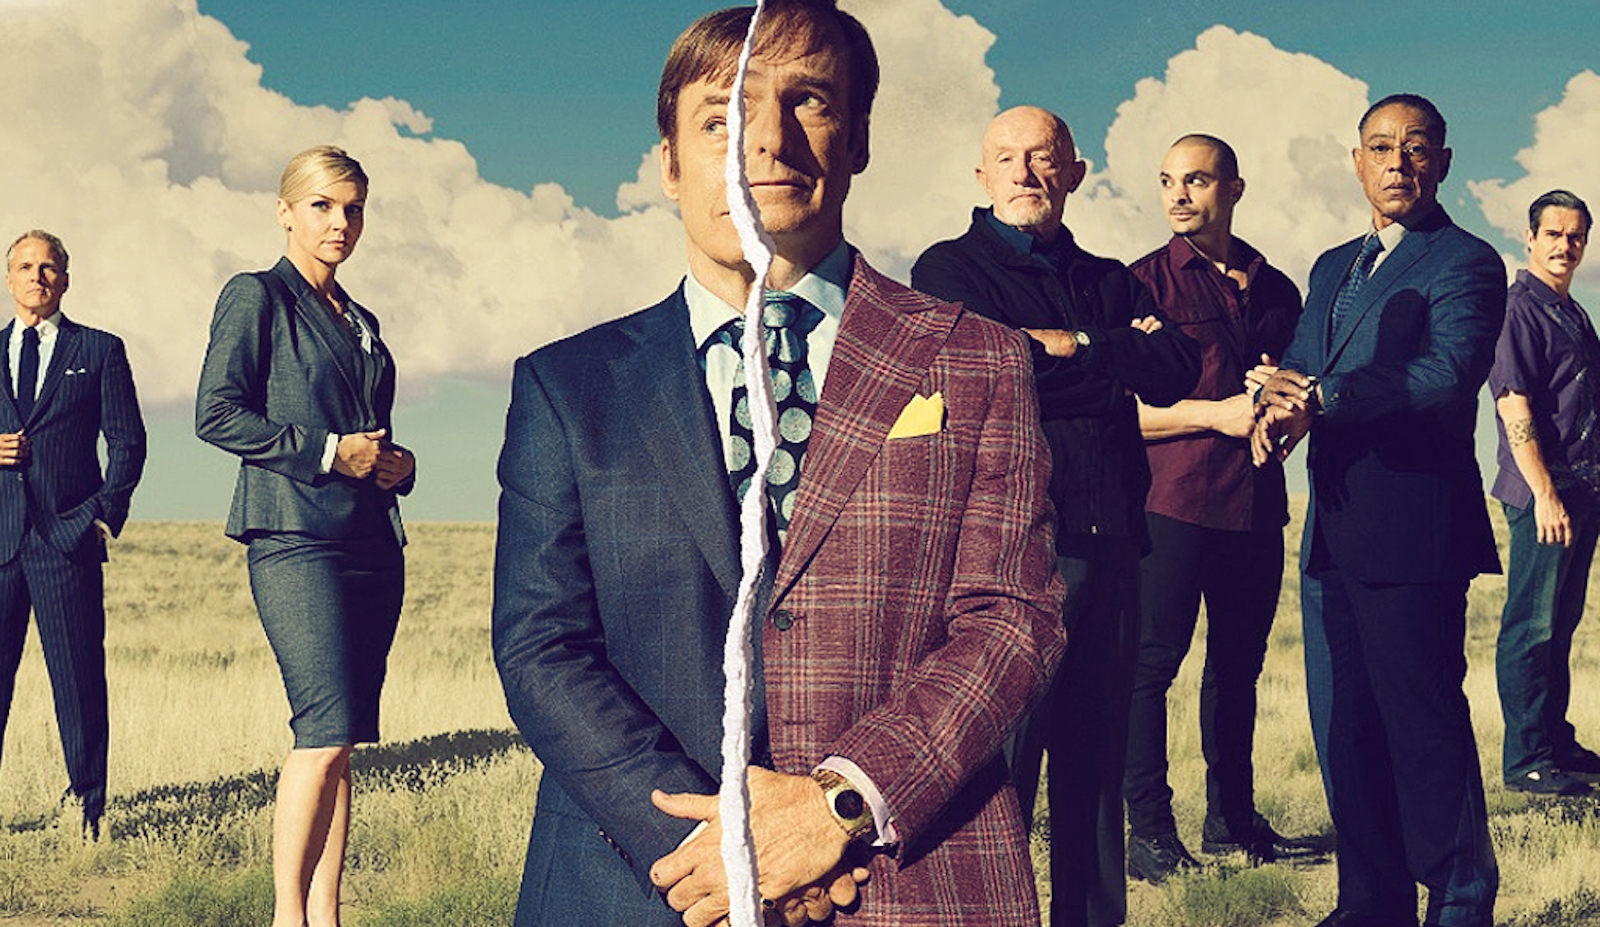 The cast of Better Call Saul